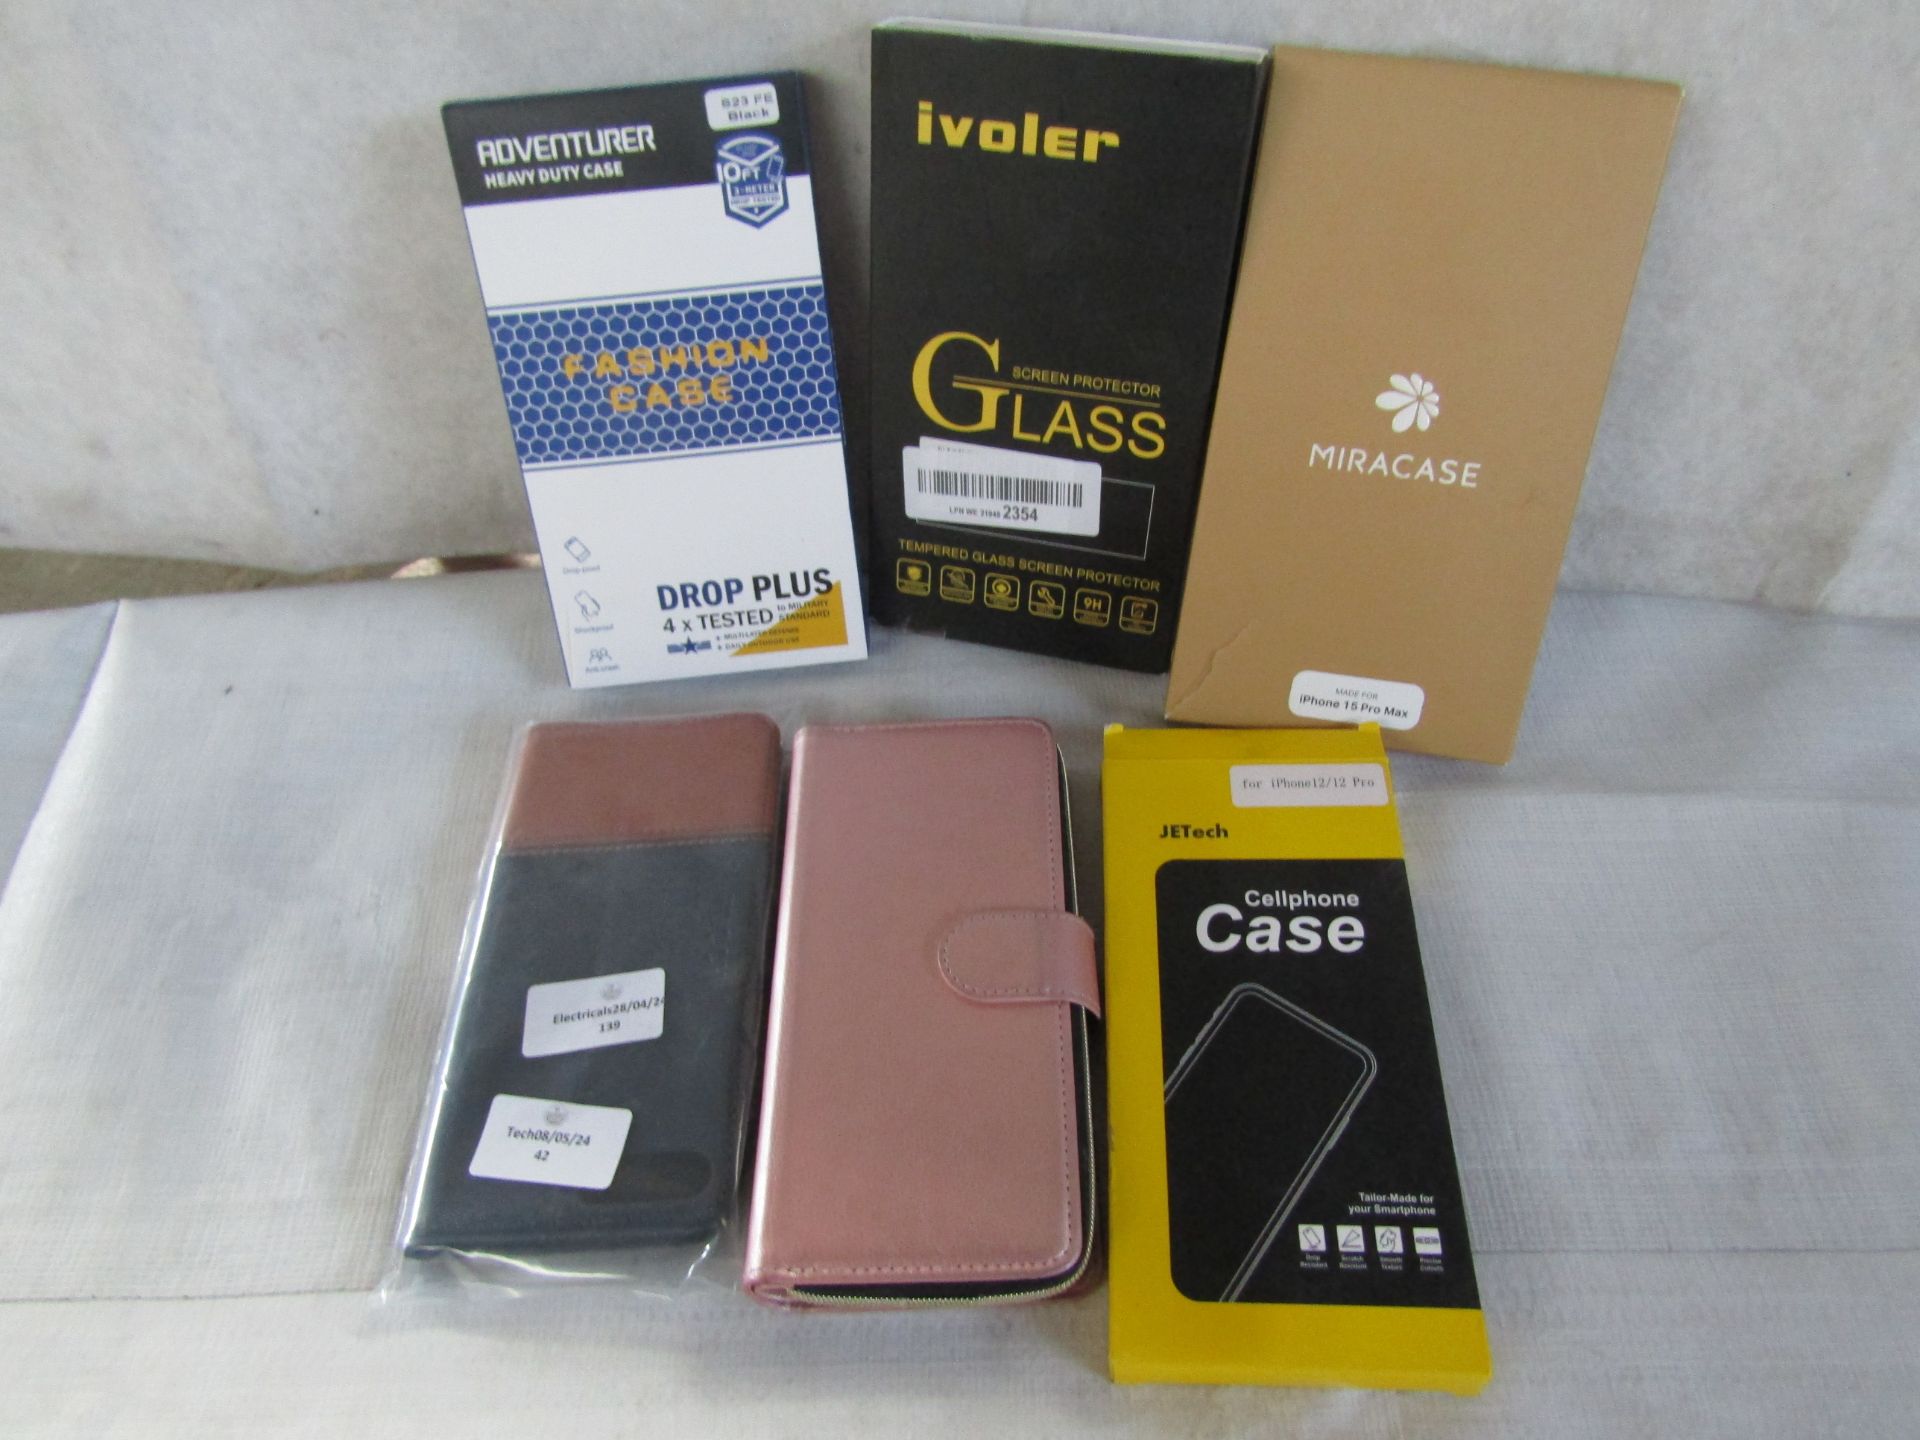 6x Various Assortred Phone Cases - All Unchecked & Packaged.